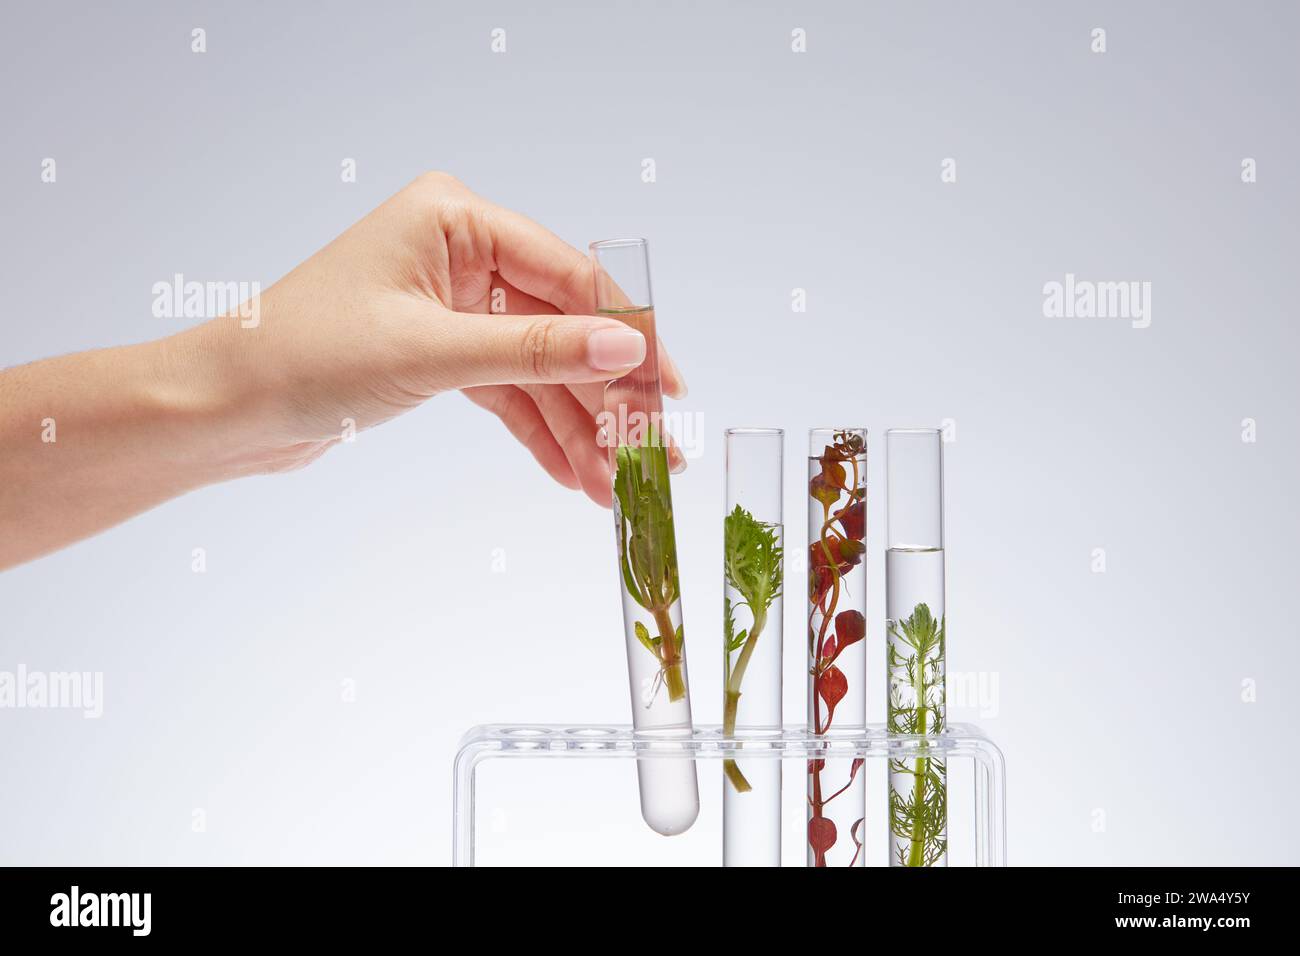 On the rack are test tubes containing test samples of different types of seaweed on a white background. Female hand lifting a test tube out of the rac Stock Photo